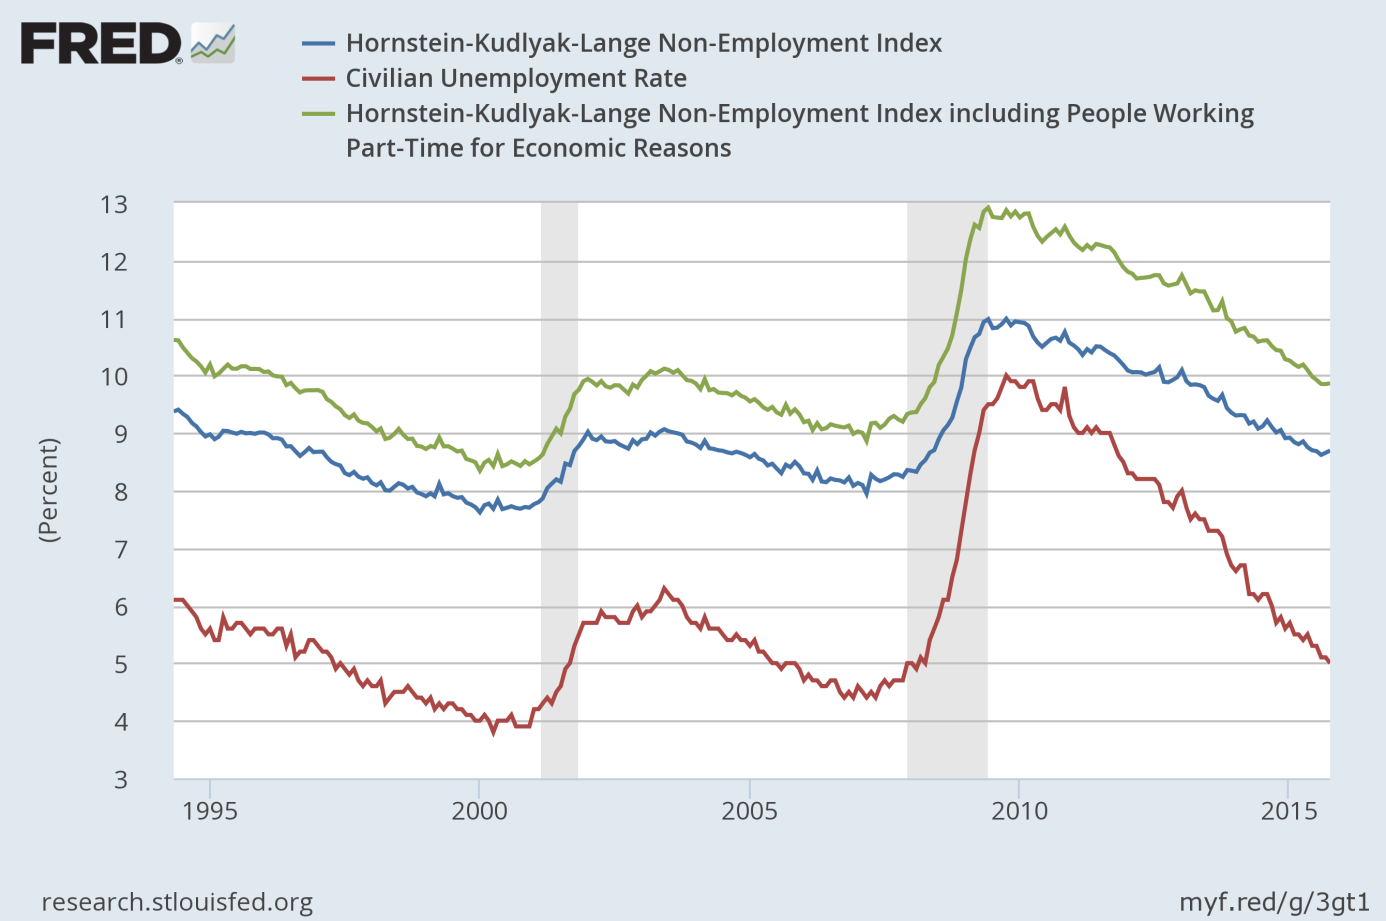 The official Civilian Unemployment Rate and the Non-Employment Index.